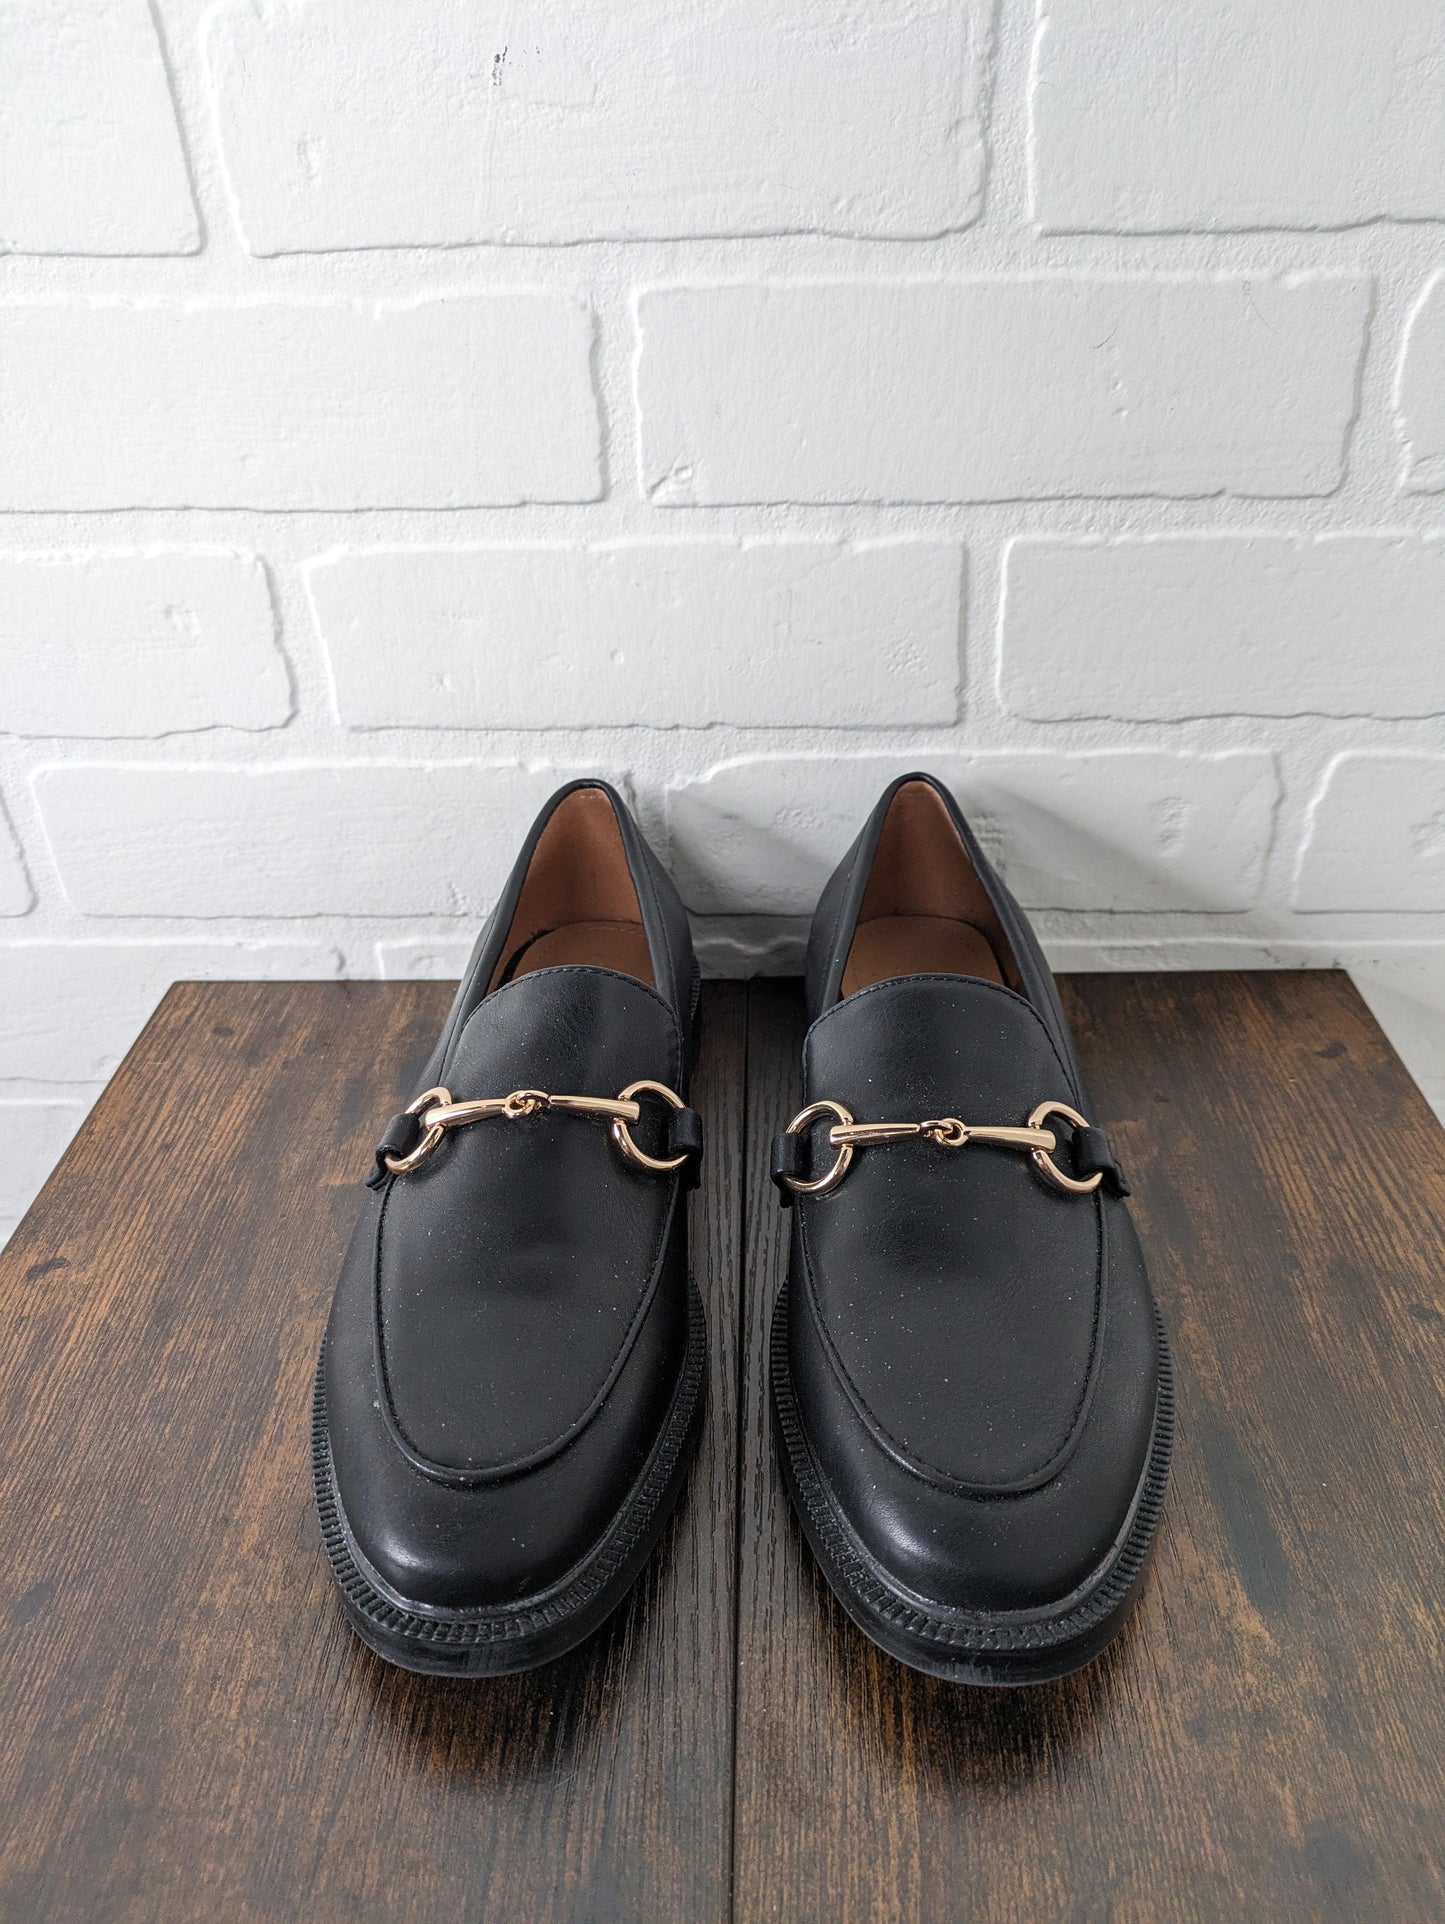 Shoes Flats Loafer Oxford By H&m  Size: 7